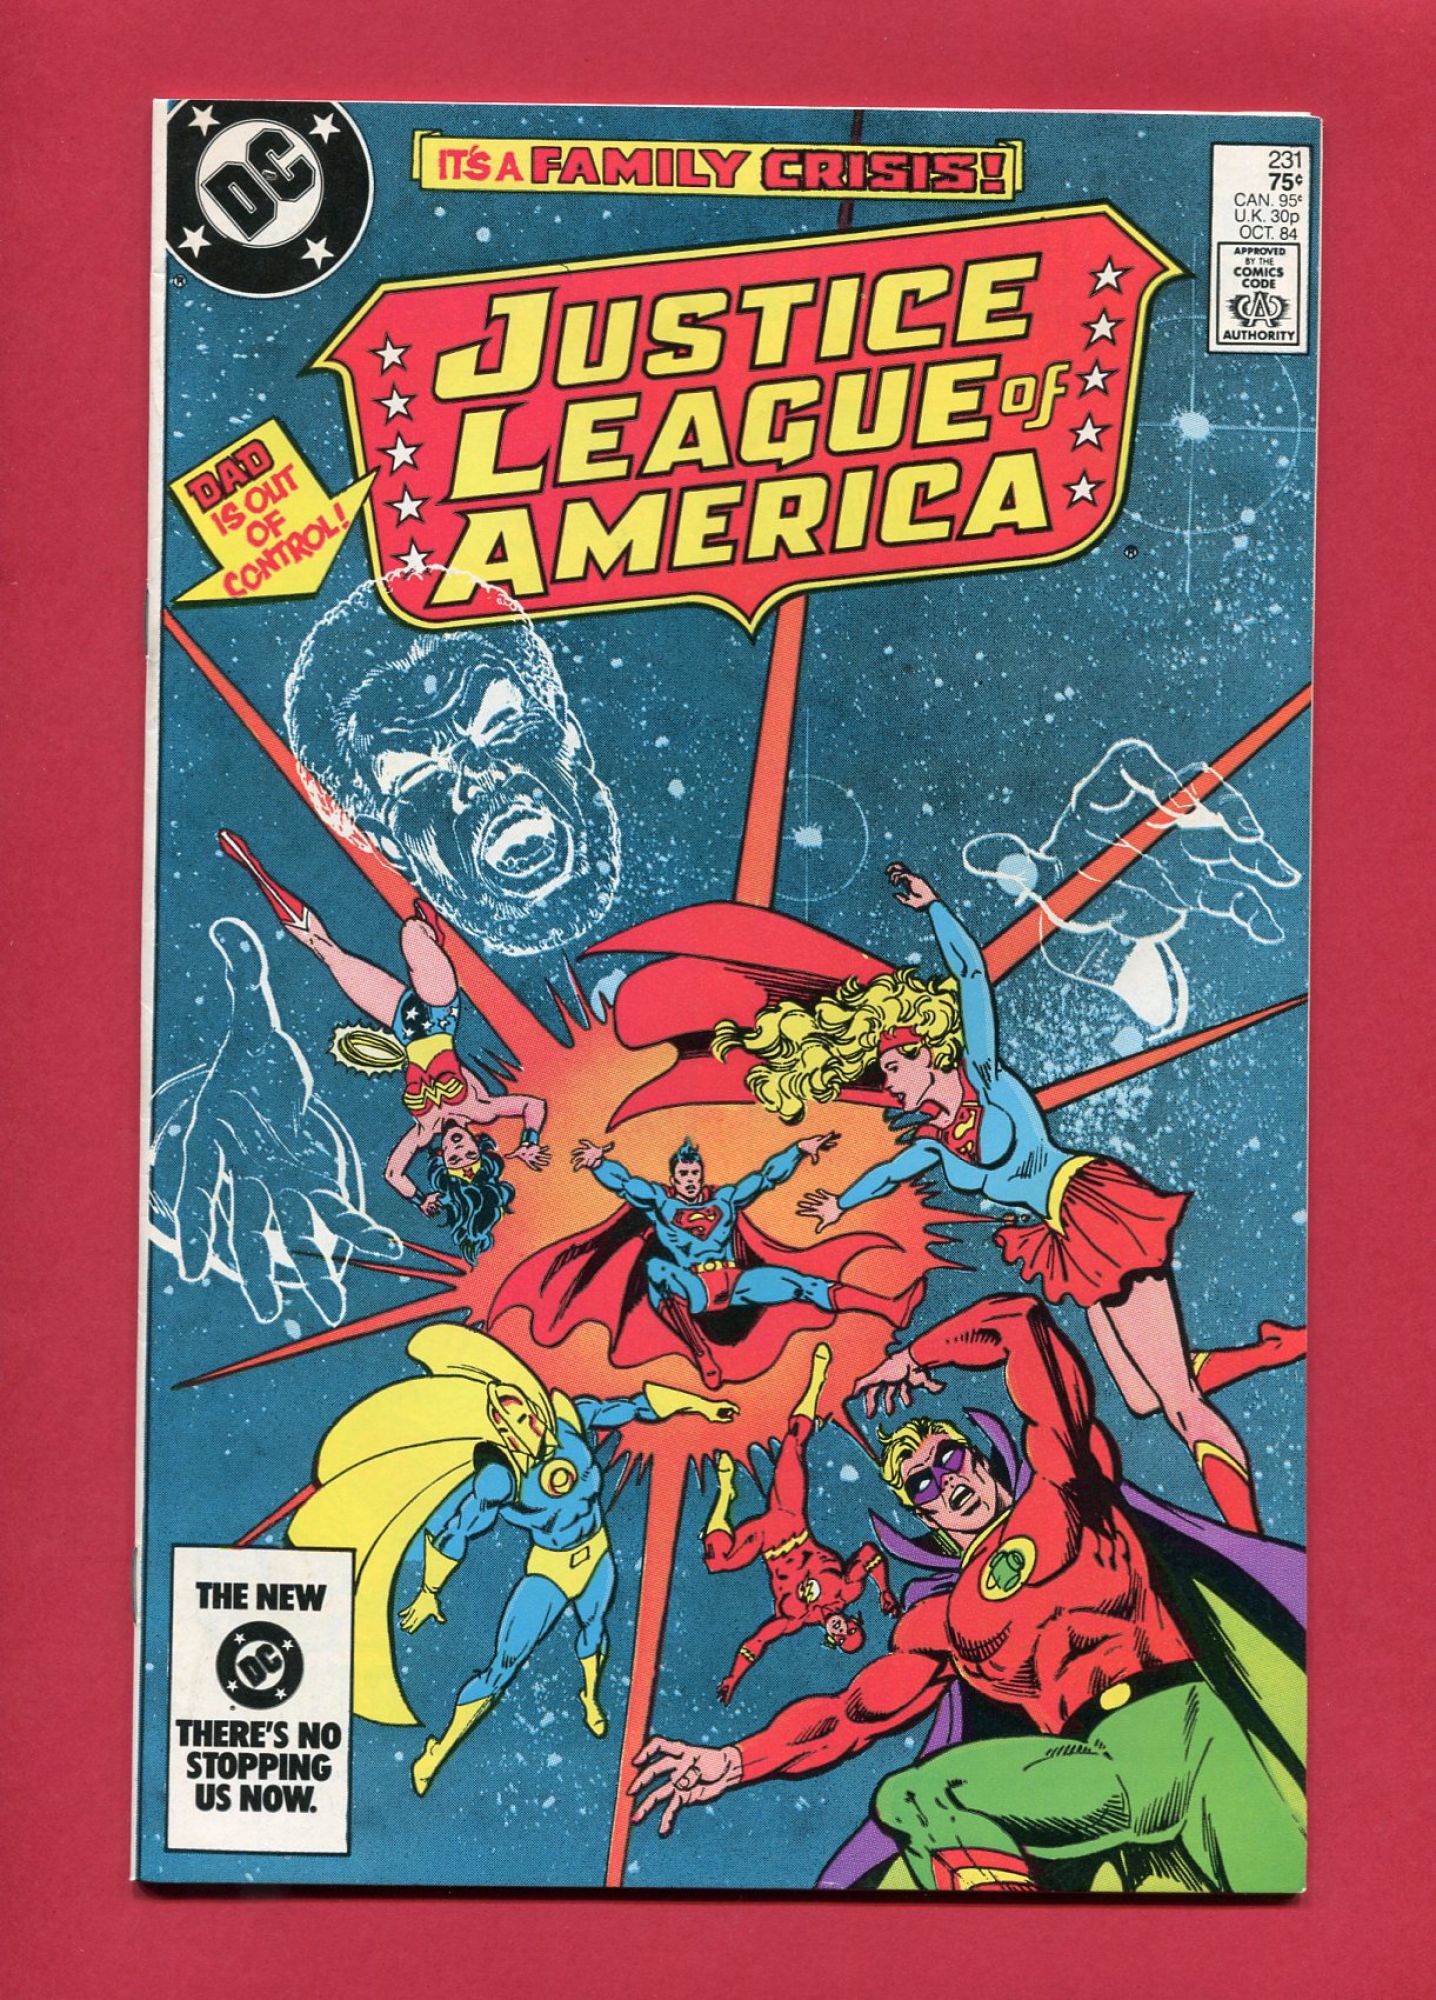 Justice League of America (Volume 1 1960) #231, Oct 1984, 8.5 VF+